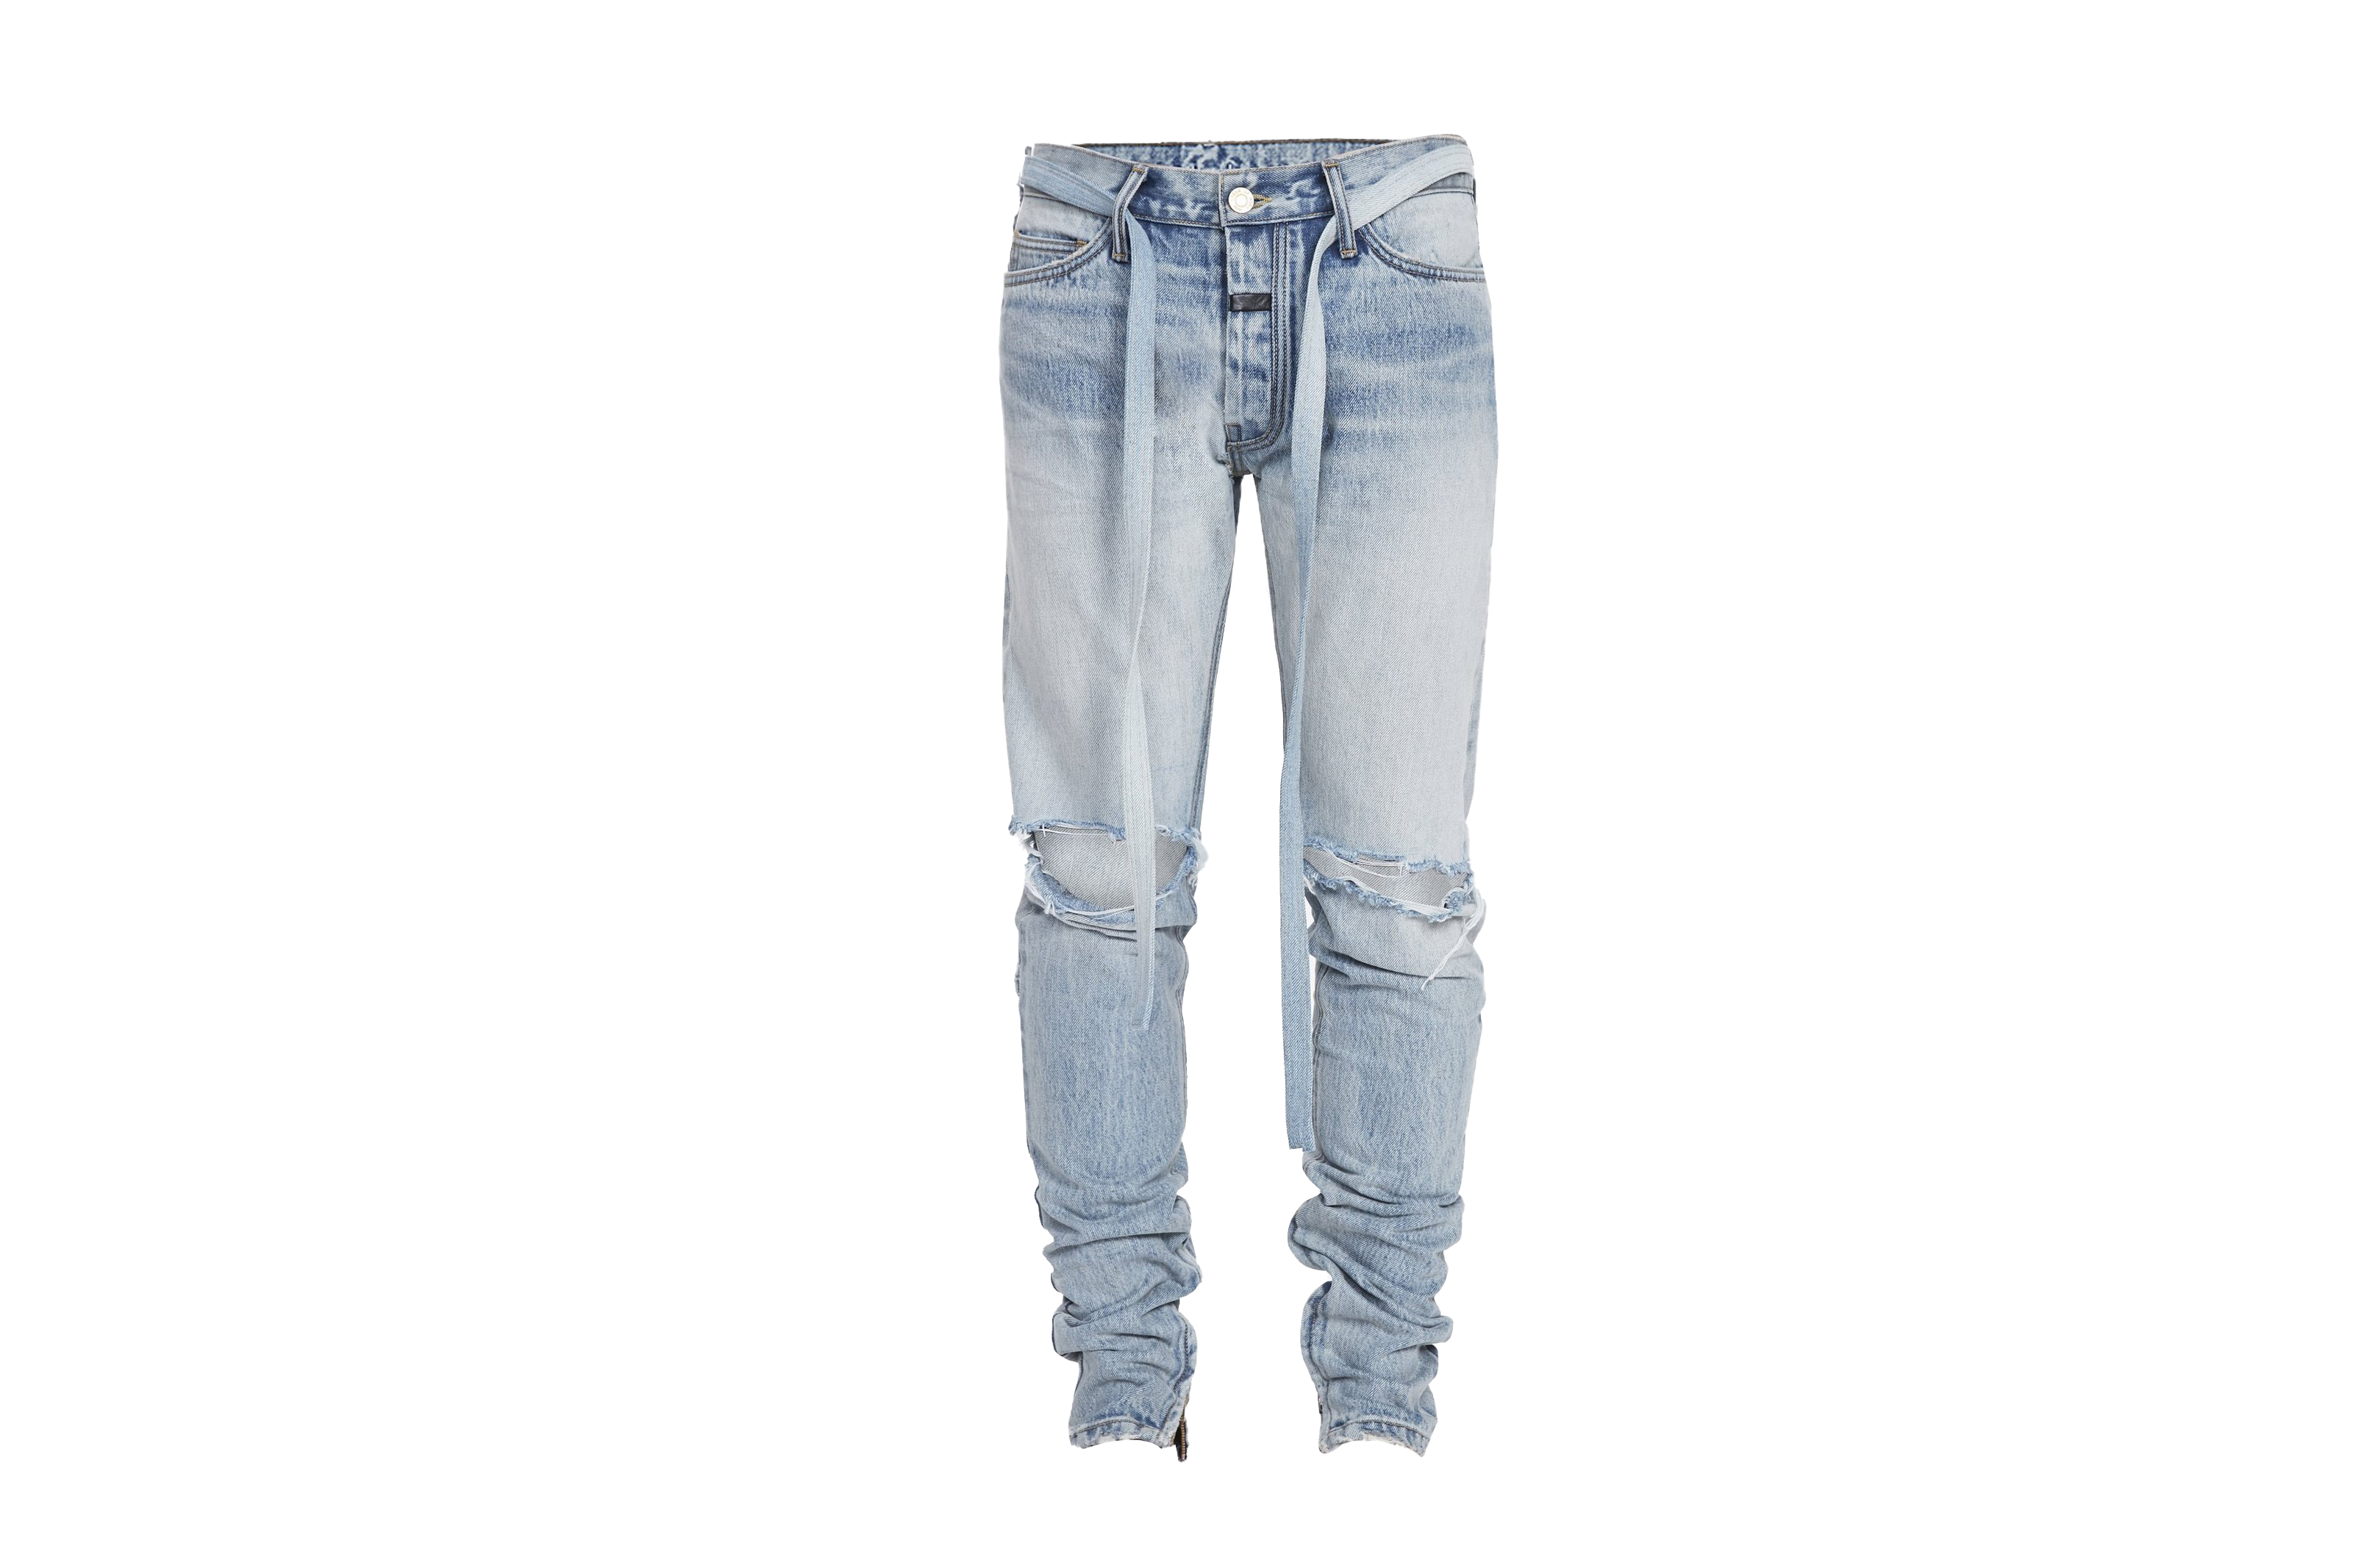 FEAR OF GOD Skinny Fit Distressed Denim with Ankle Zippers 